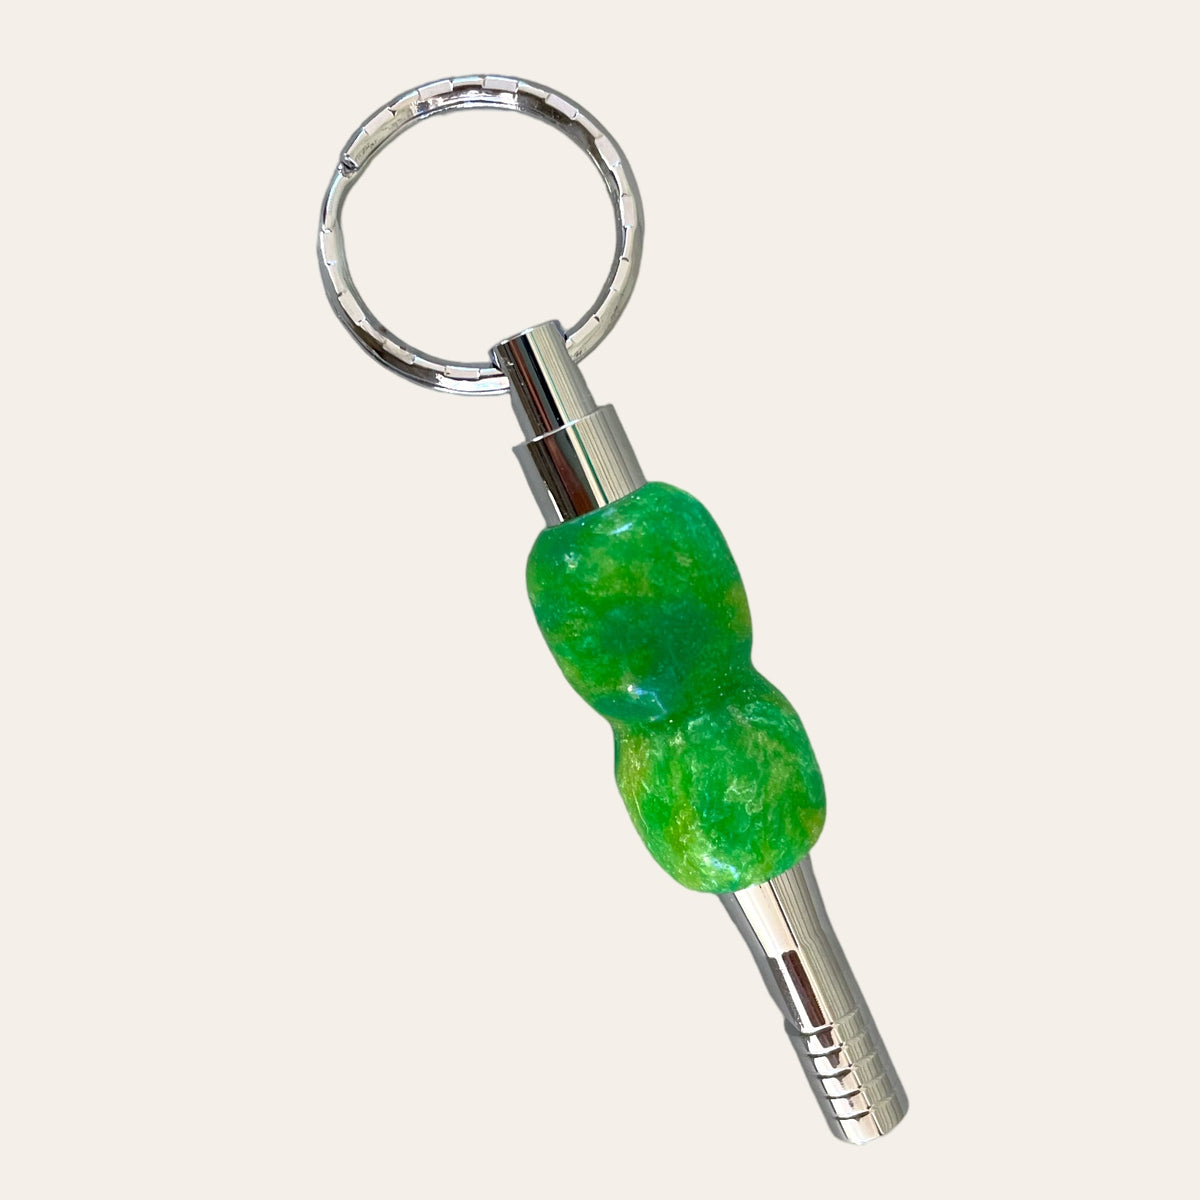 Lemon Lime Resin Key Chain with Safety Whistle